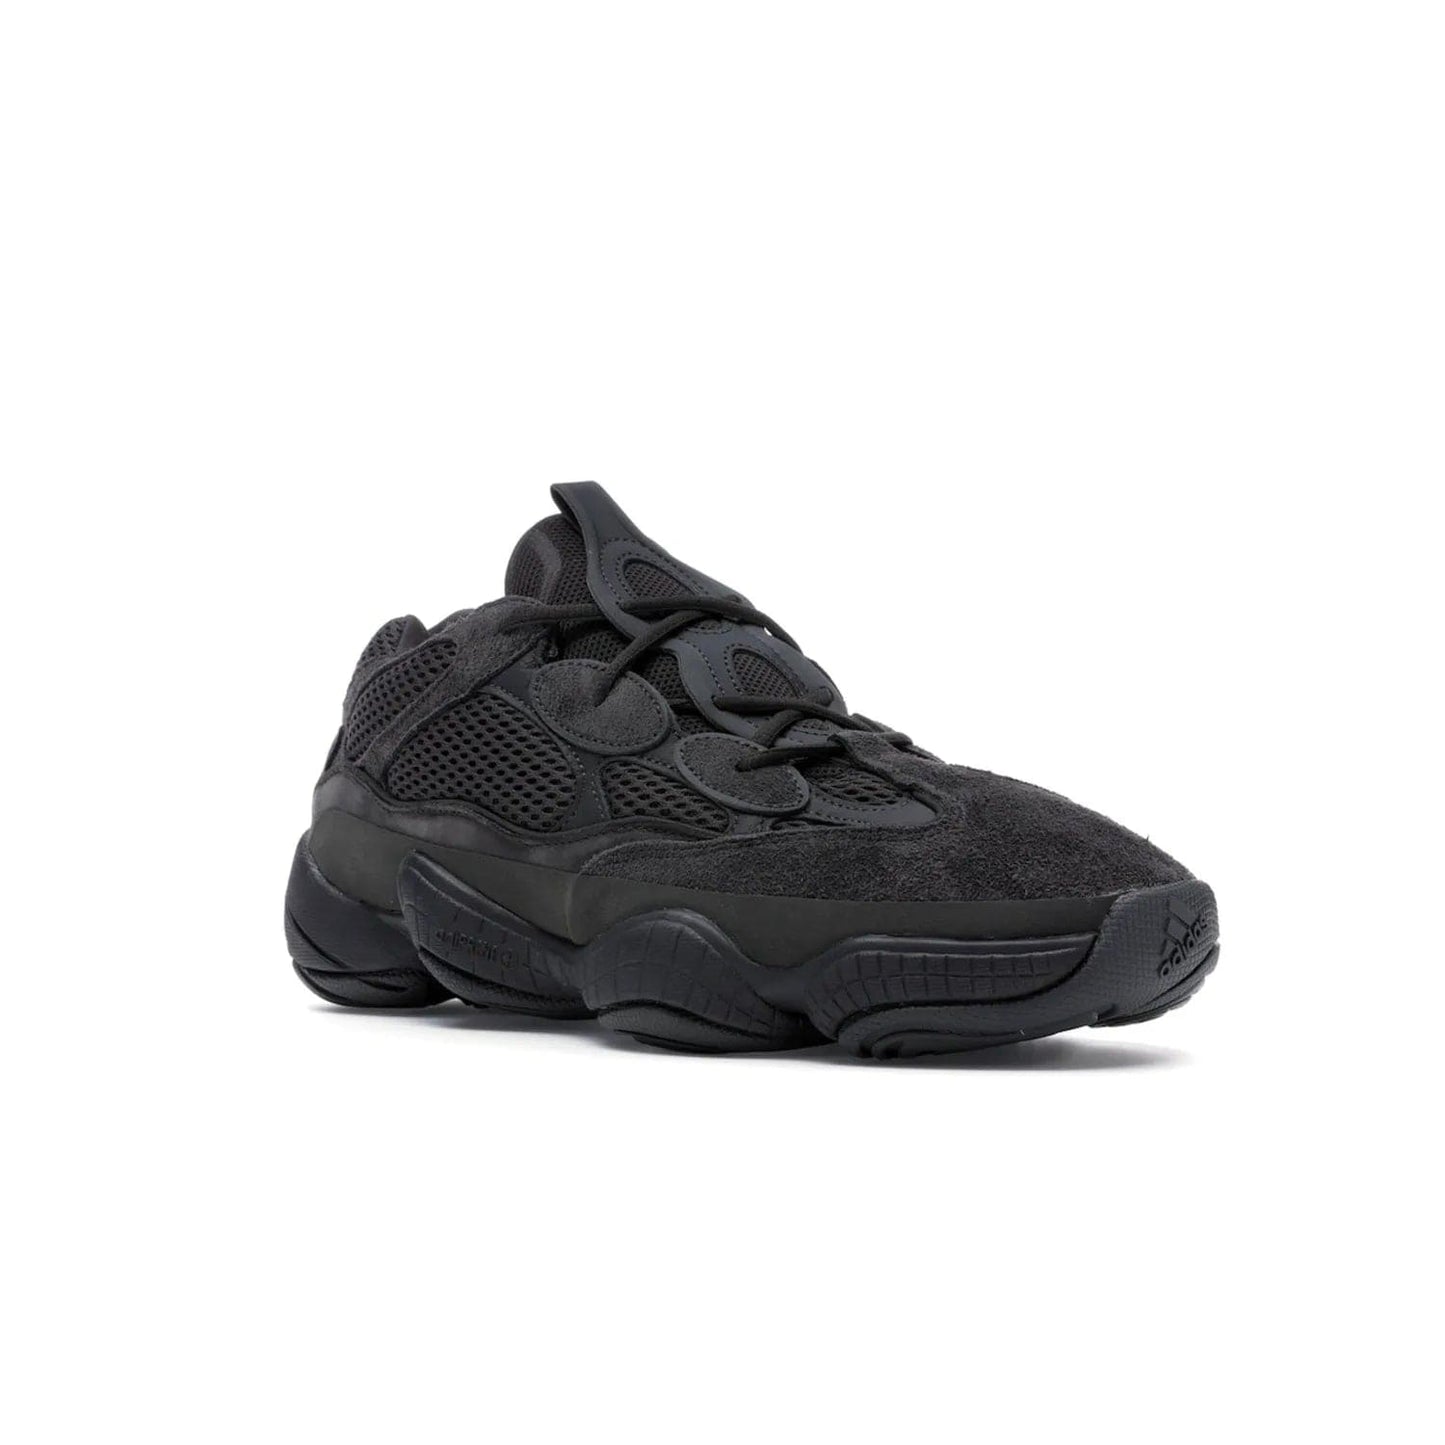 adidas Yeezy 500 Utility Black - Image 6 - Only at www.BallersClubKickz.com - Iconic adidas Yeezy 500 Utility Black in All-Black colorway. Durable black mesh and suede upper with adiPRENE® sole delivers comfort and support. Be unstoppable with the Yeezy 500 Utility Black. Released July 2018.